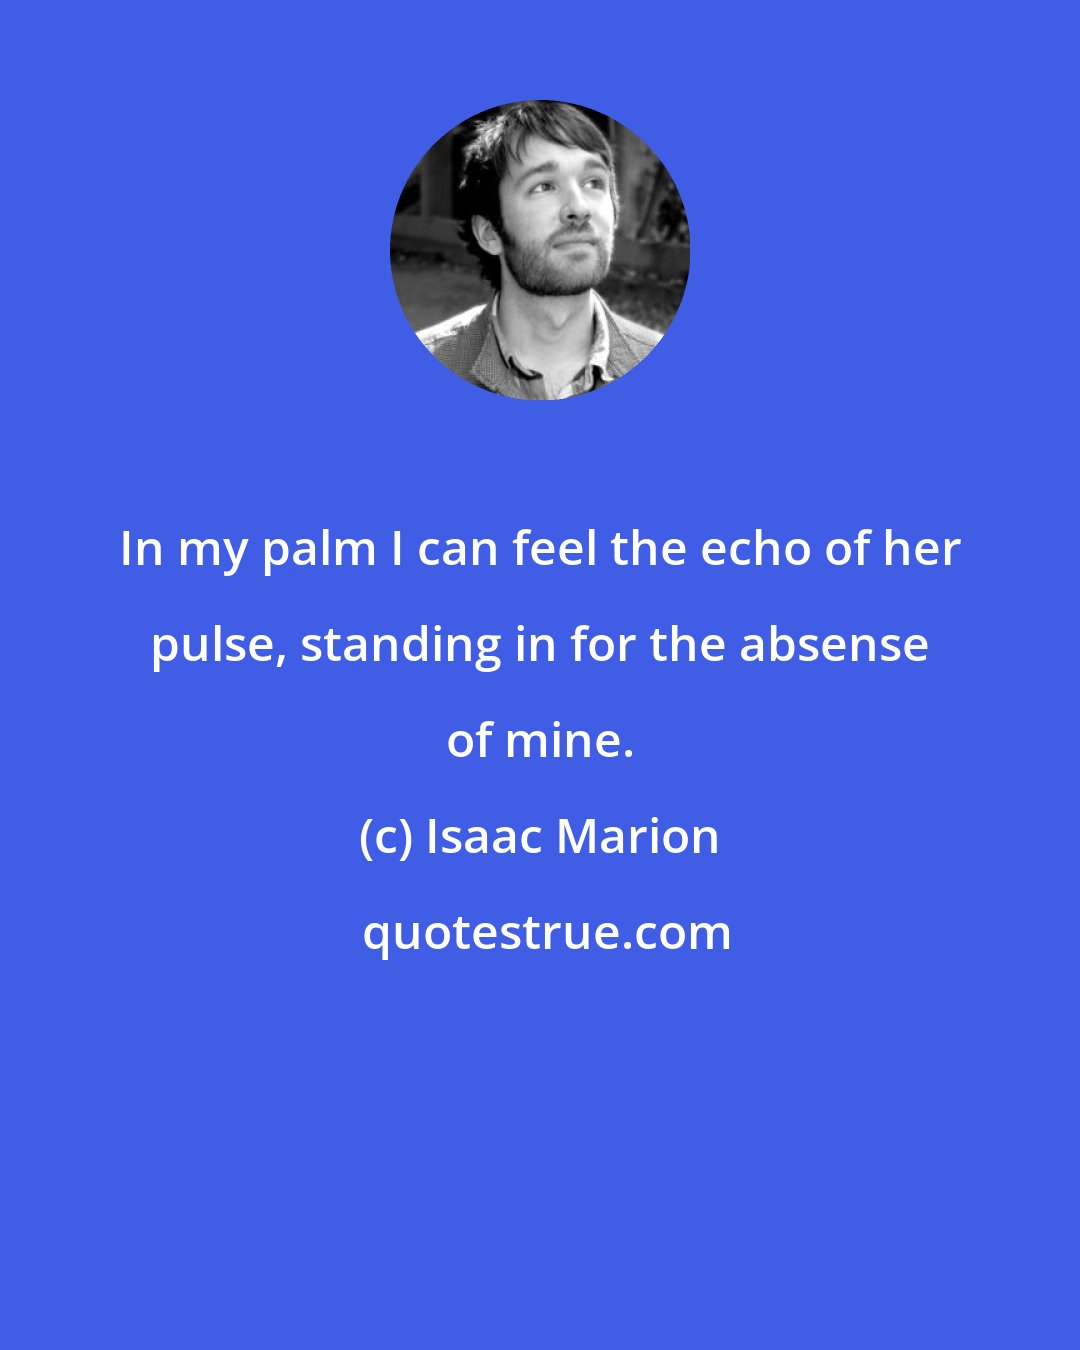 Isaac Marion: In my palm I can feel the echo of her pulse, standing in for the absense of mine.